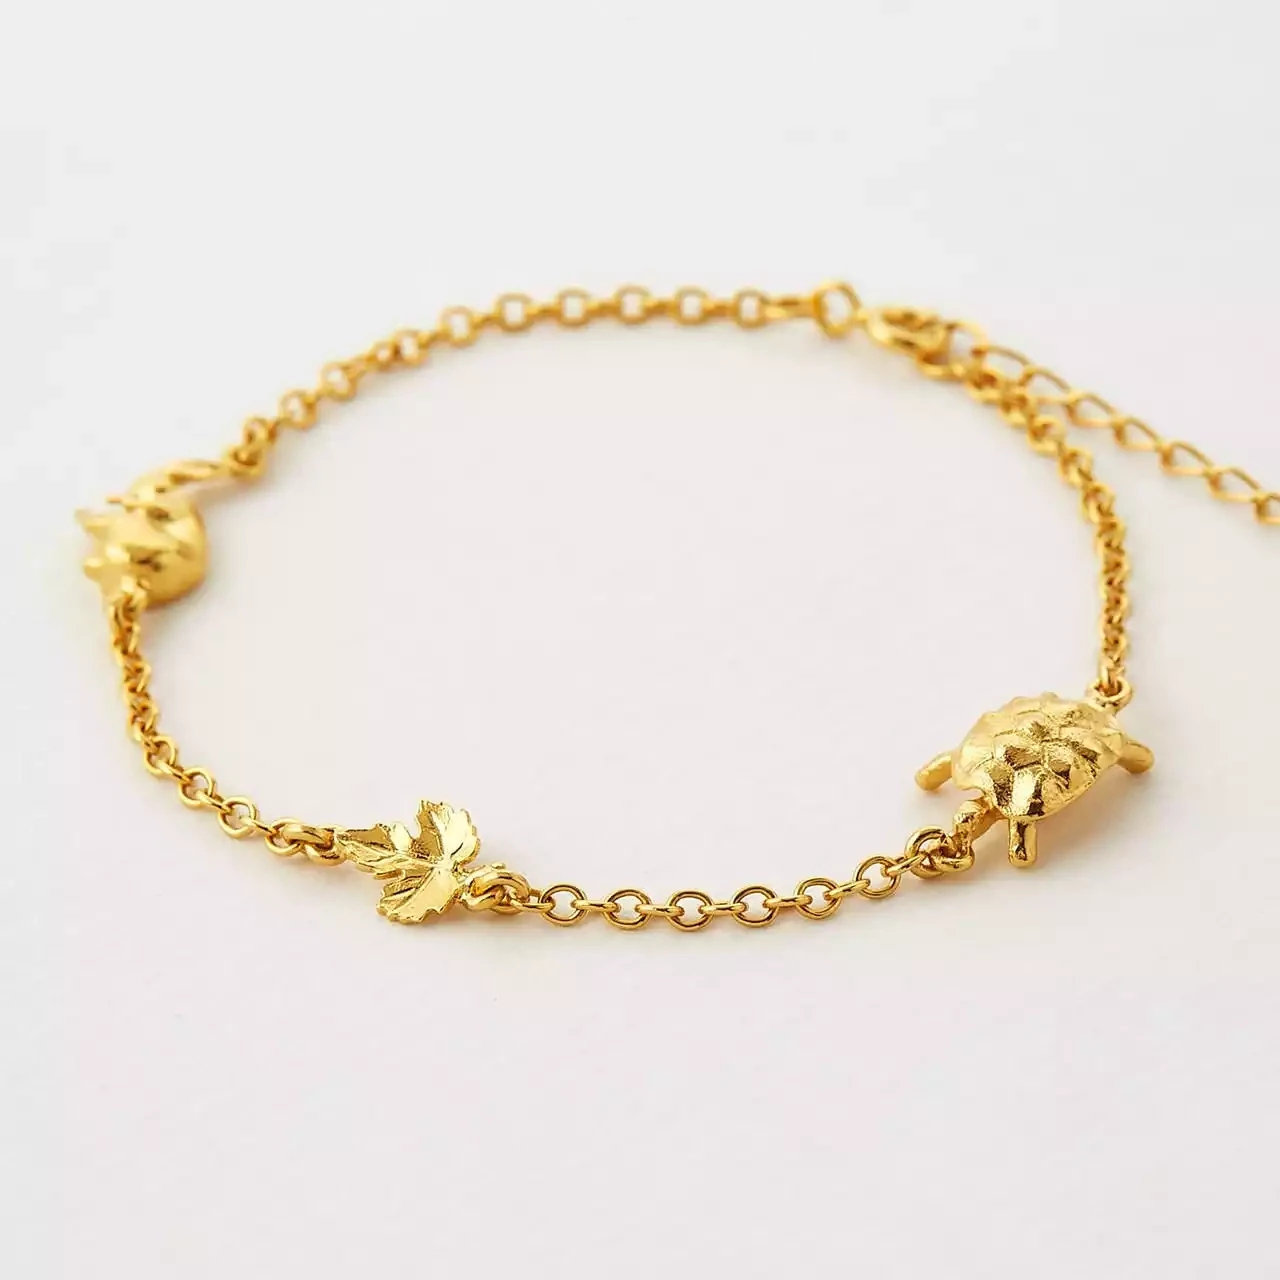 Tortoise & Hare In-Line Bracelet - Gold Plated by Alex Monroe